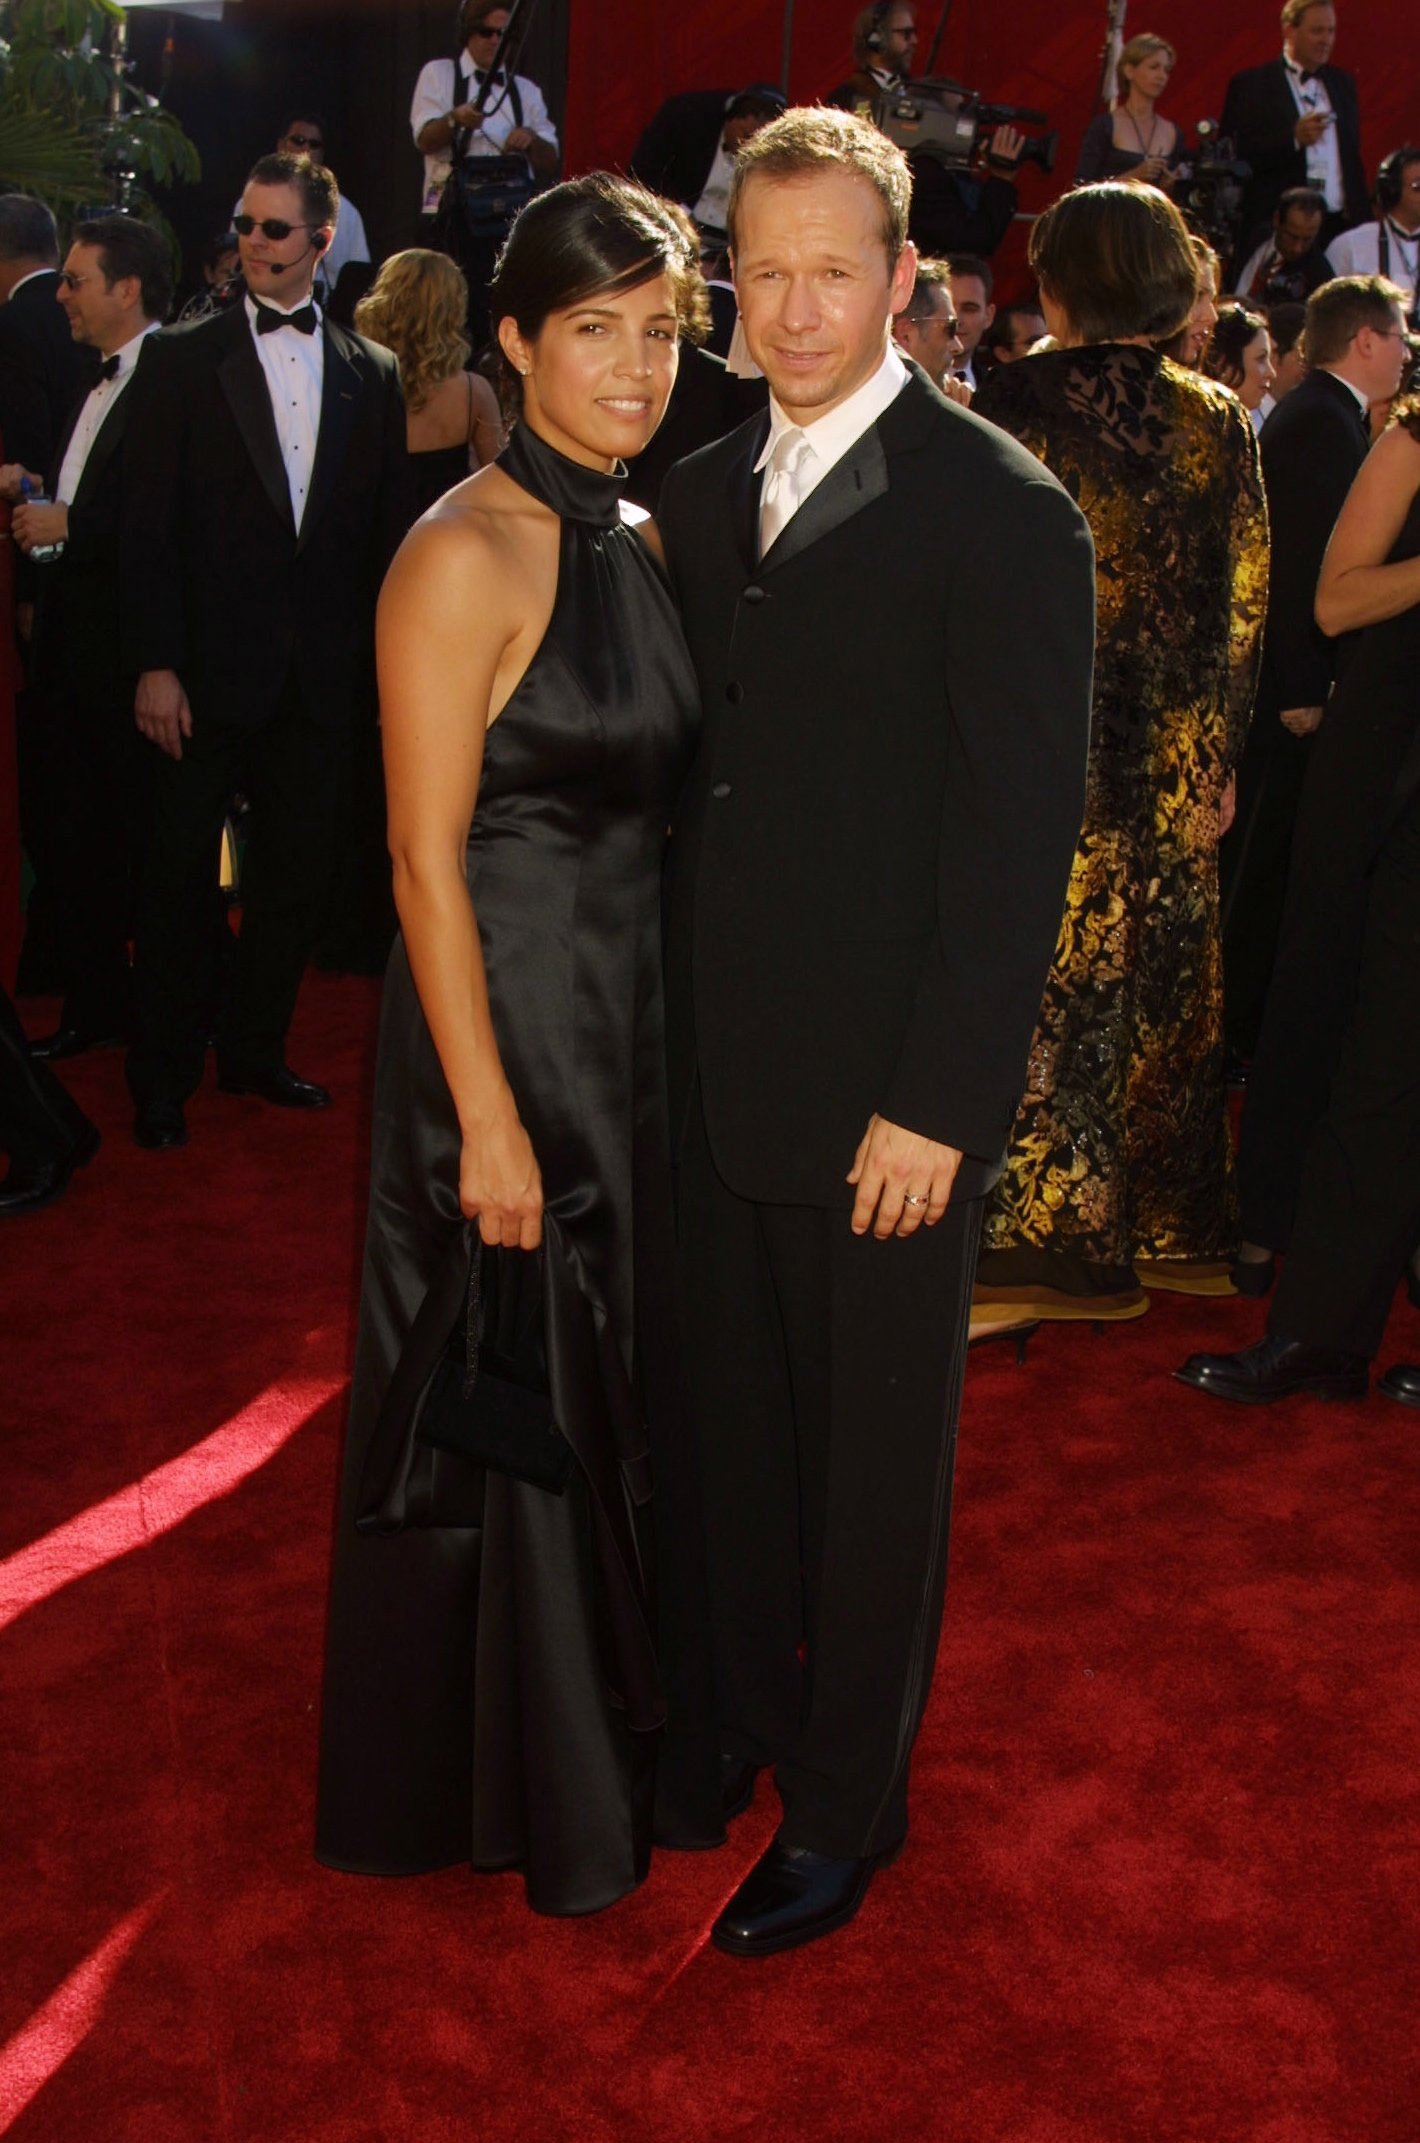 Kim Fey and Donnie Wahlberg at the 54th annual Emmy Awards on September 22, 2002 | Source: Getty Images